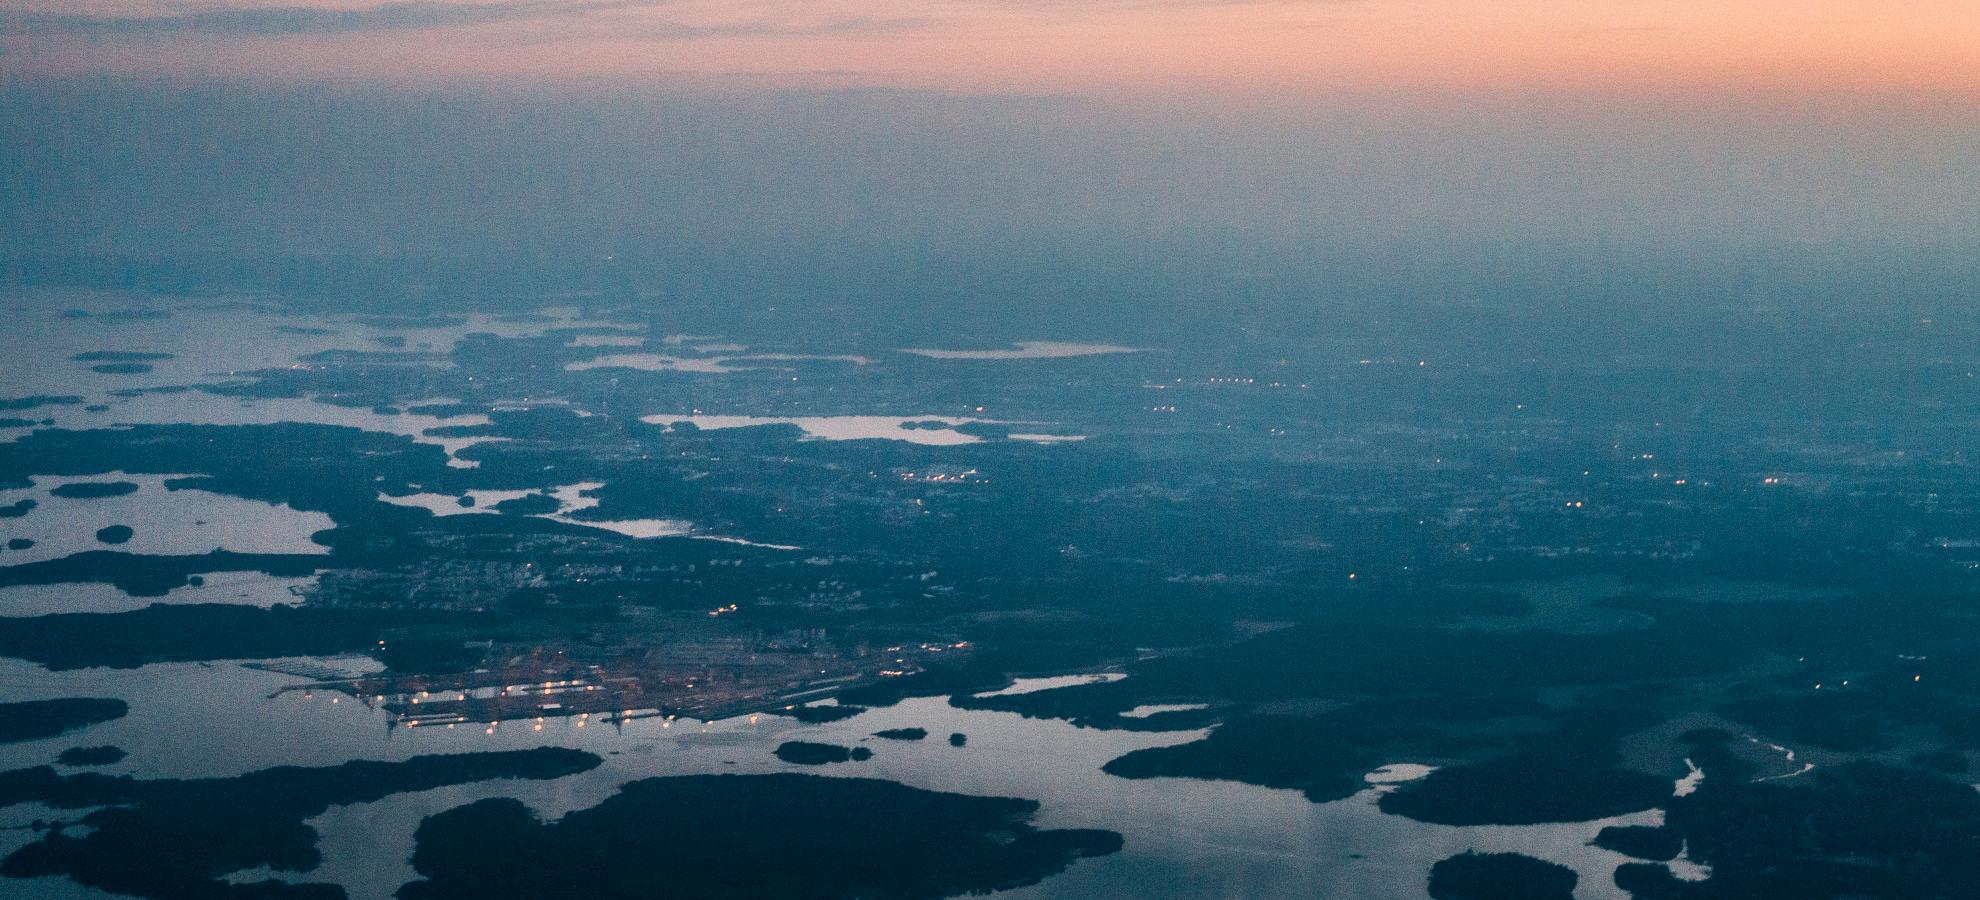 Aerial of the Vuosaari Harbour and the vast surrounding landscape at dusk. The view stretches from the islands along the coastline into the horizon kilometres away.